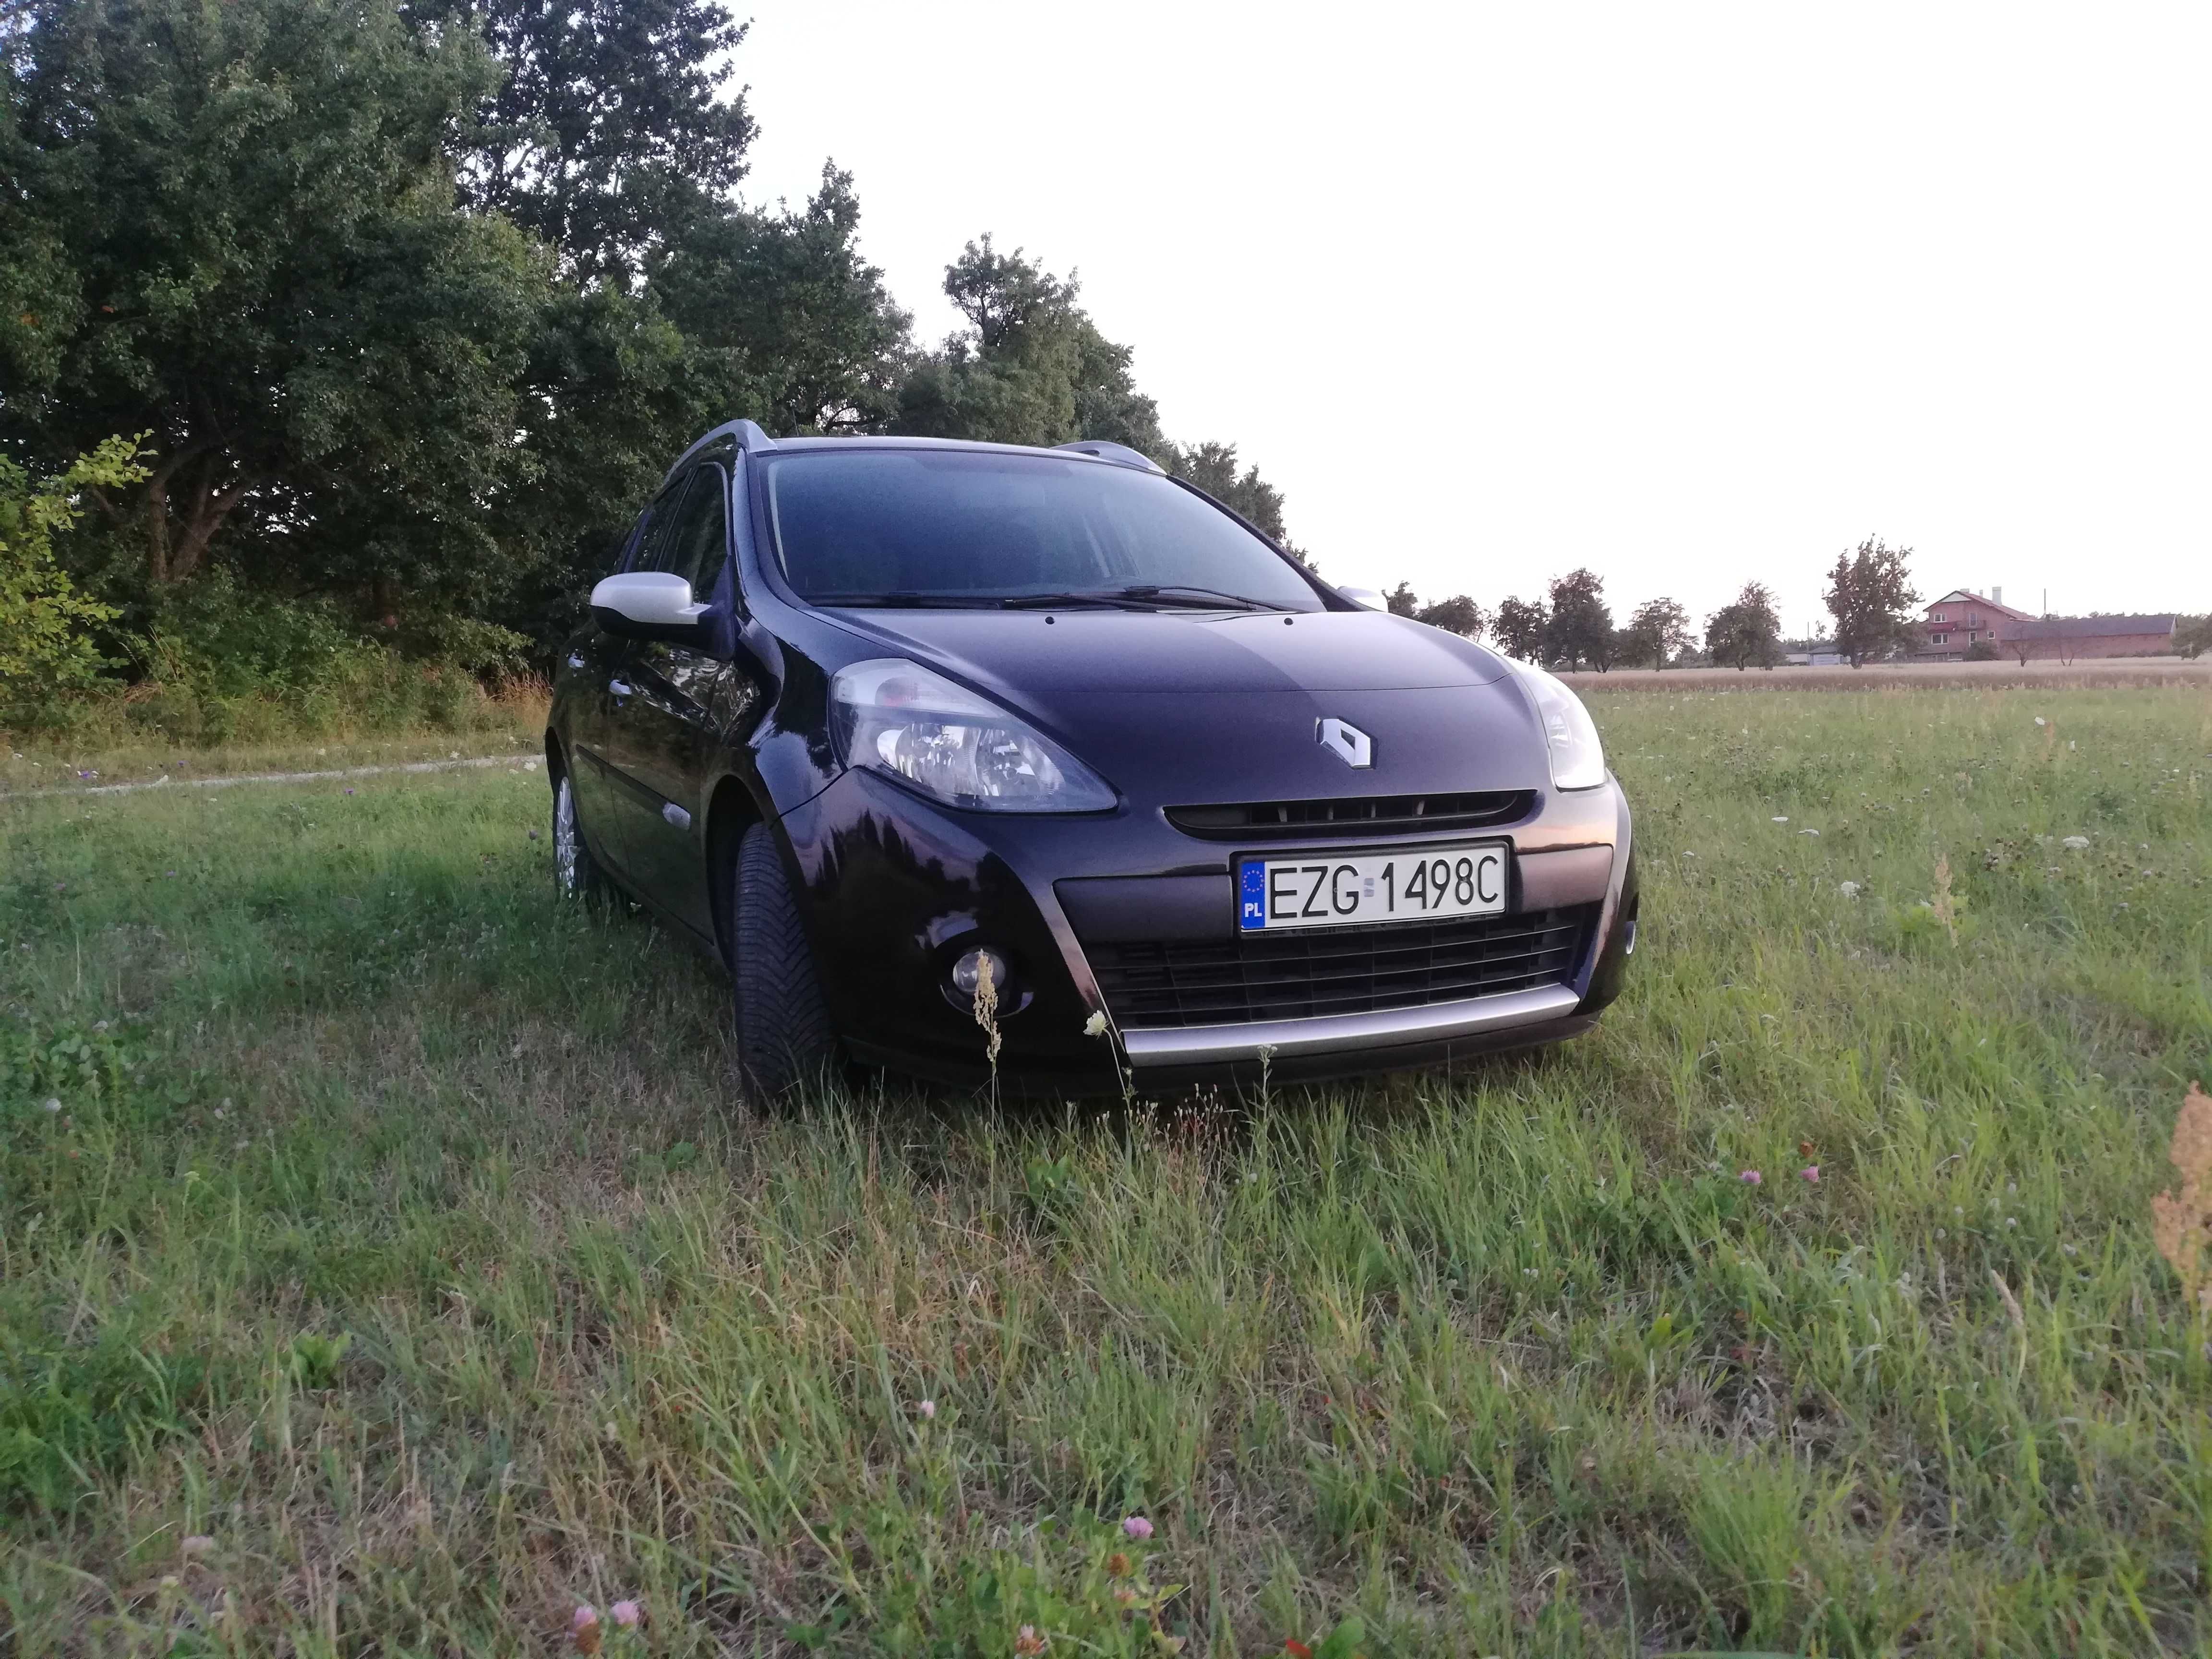 Raneult Clio 1.2 turbo Dynamique